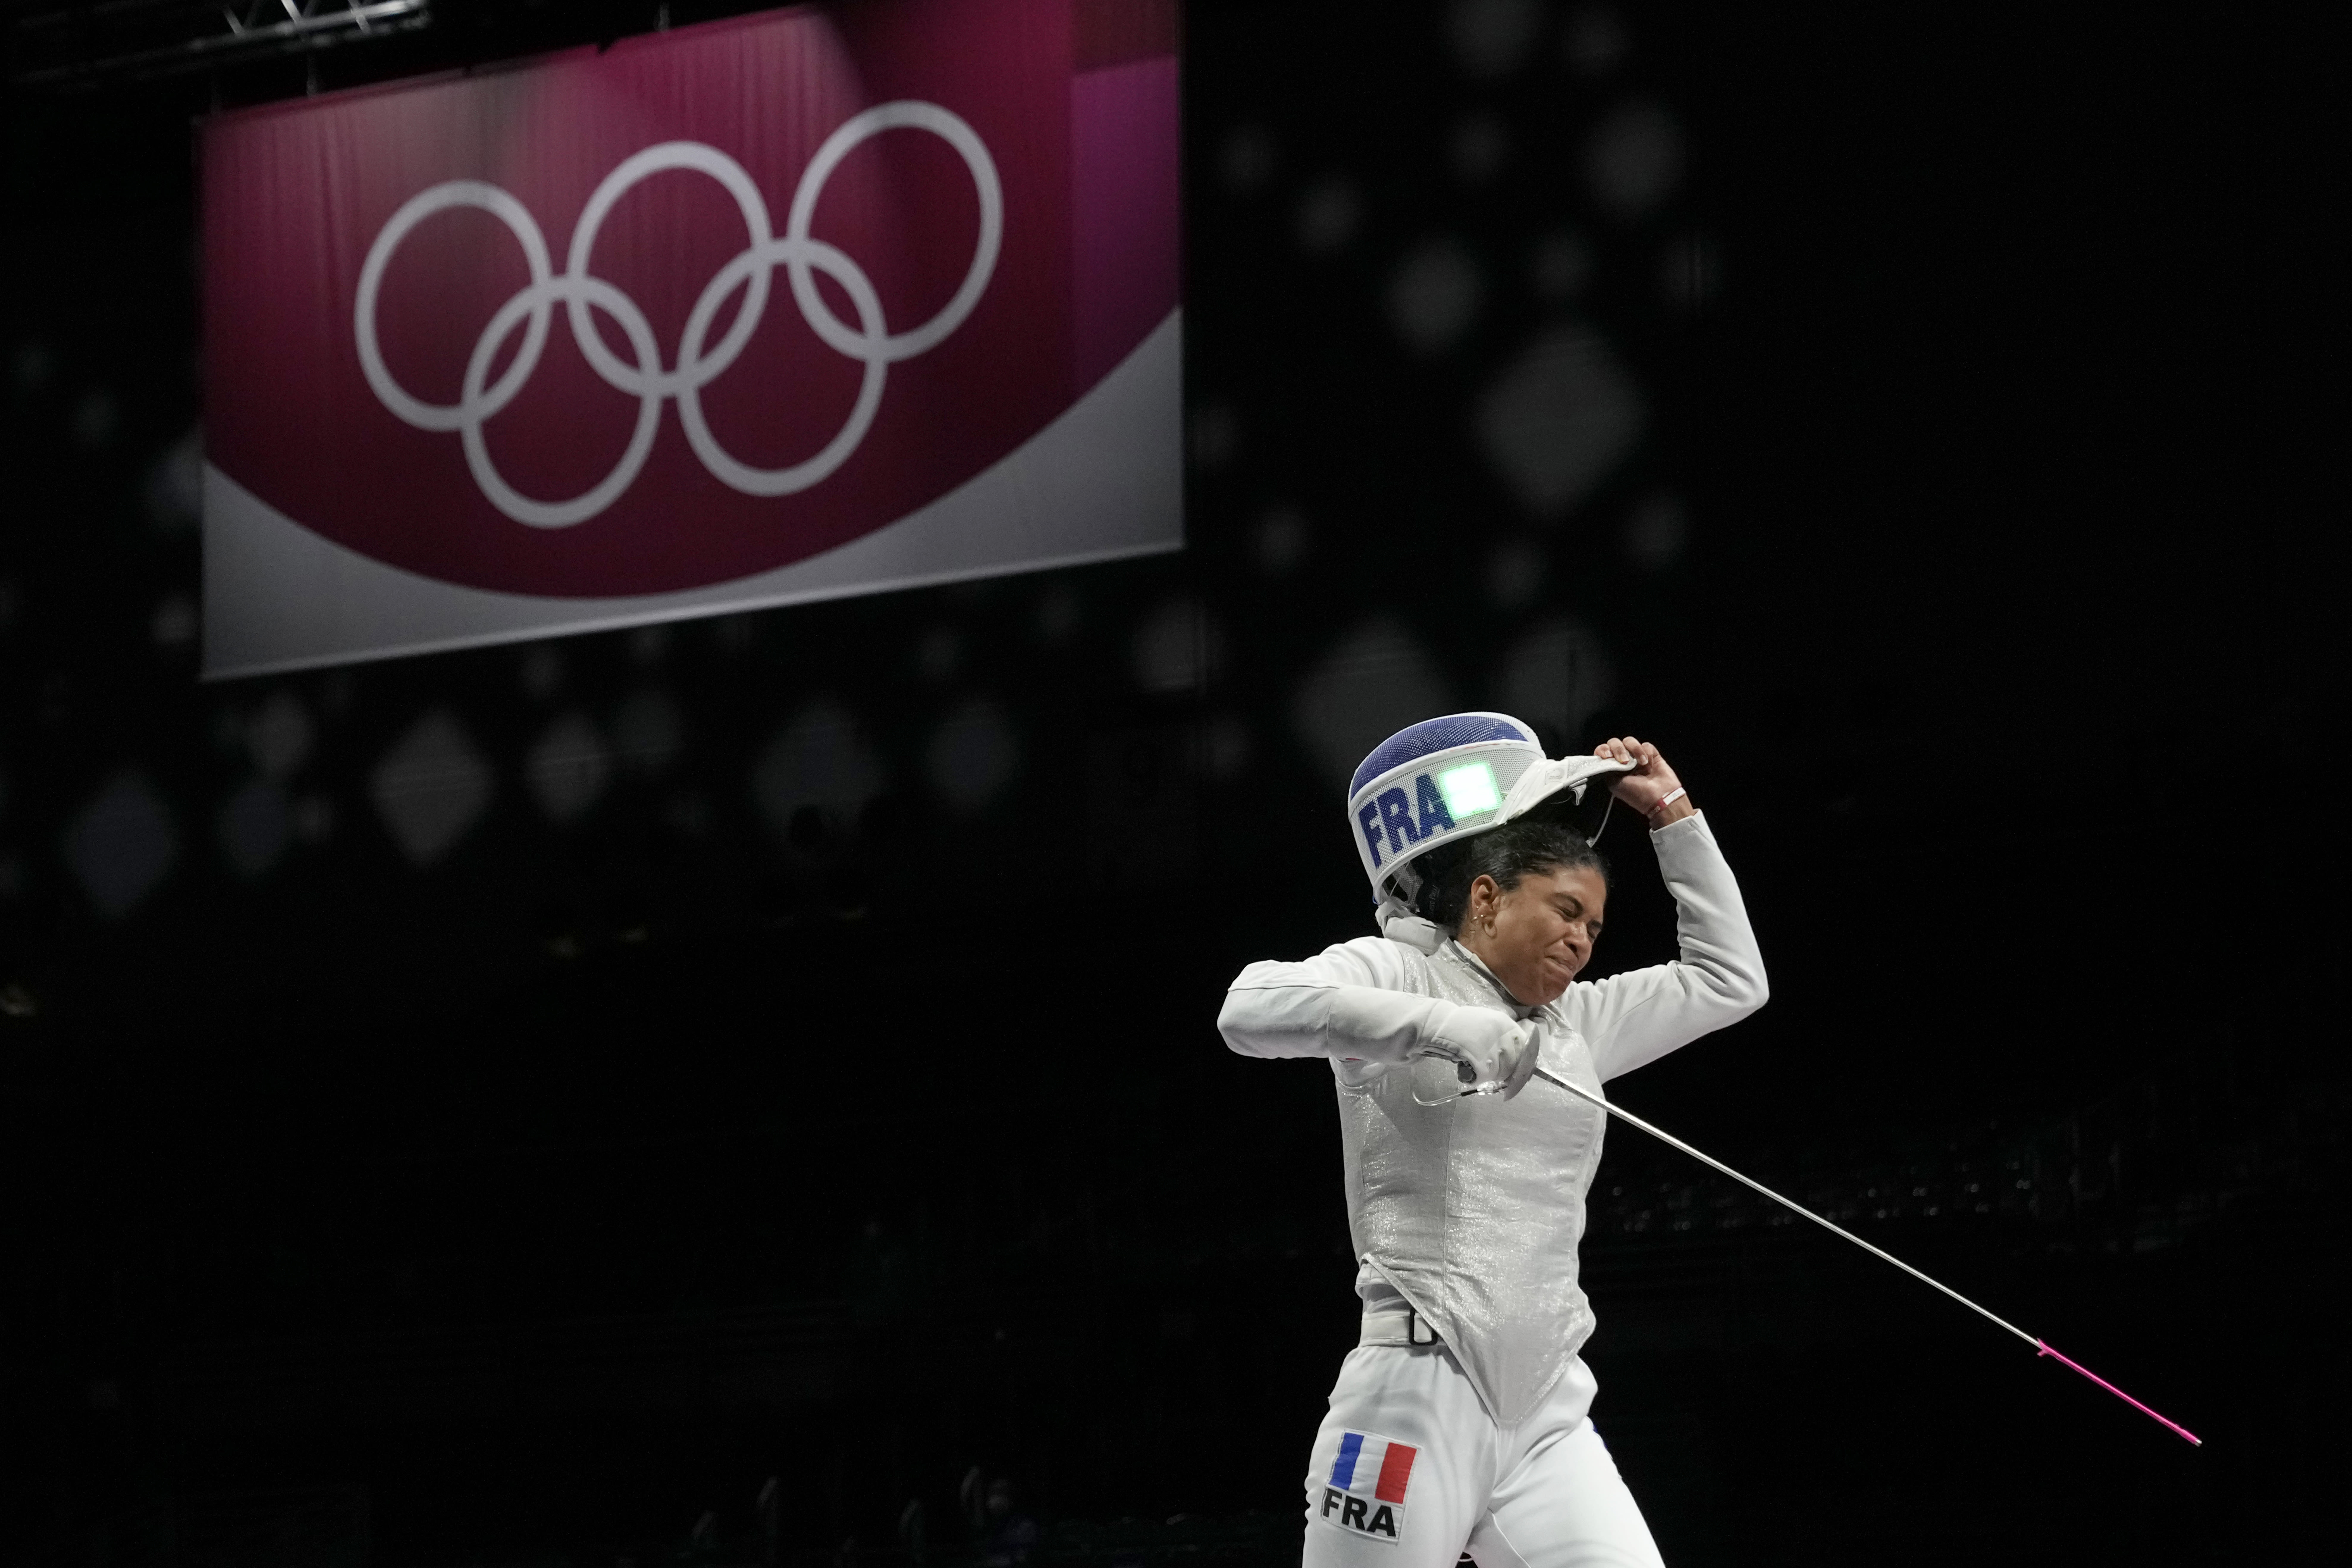 French Olympic fencer Thibus says she has been cleared of any wrongdoing after abnormal doping test